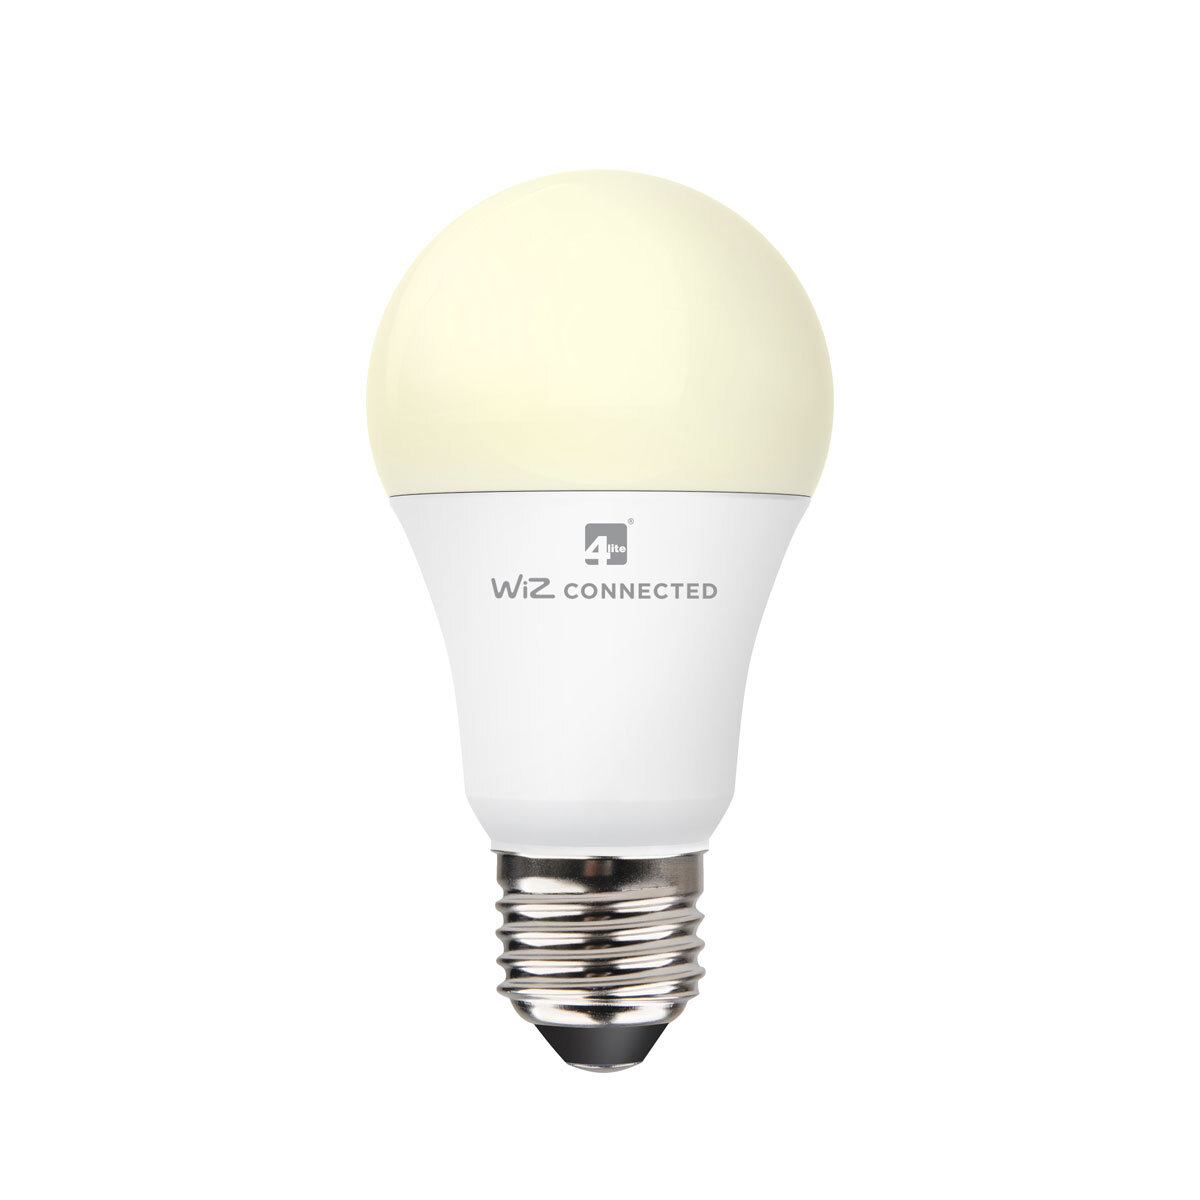 Cut out image of individual light bulb on white background